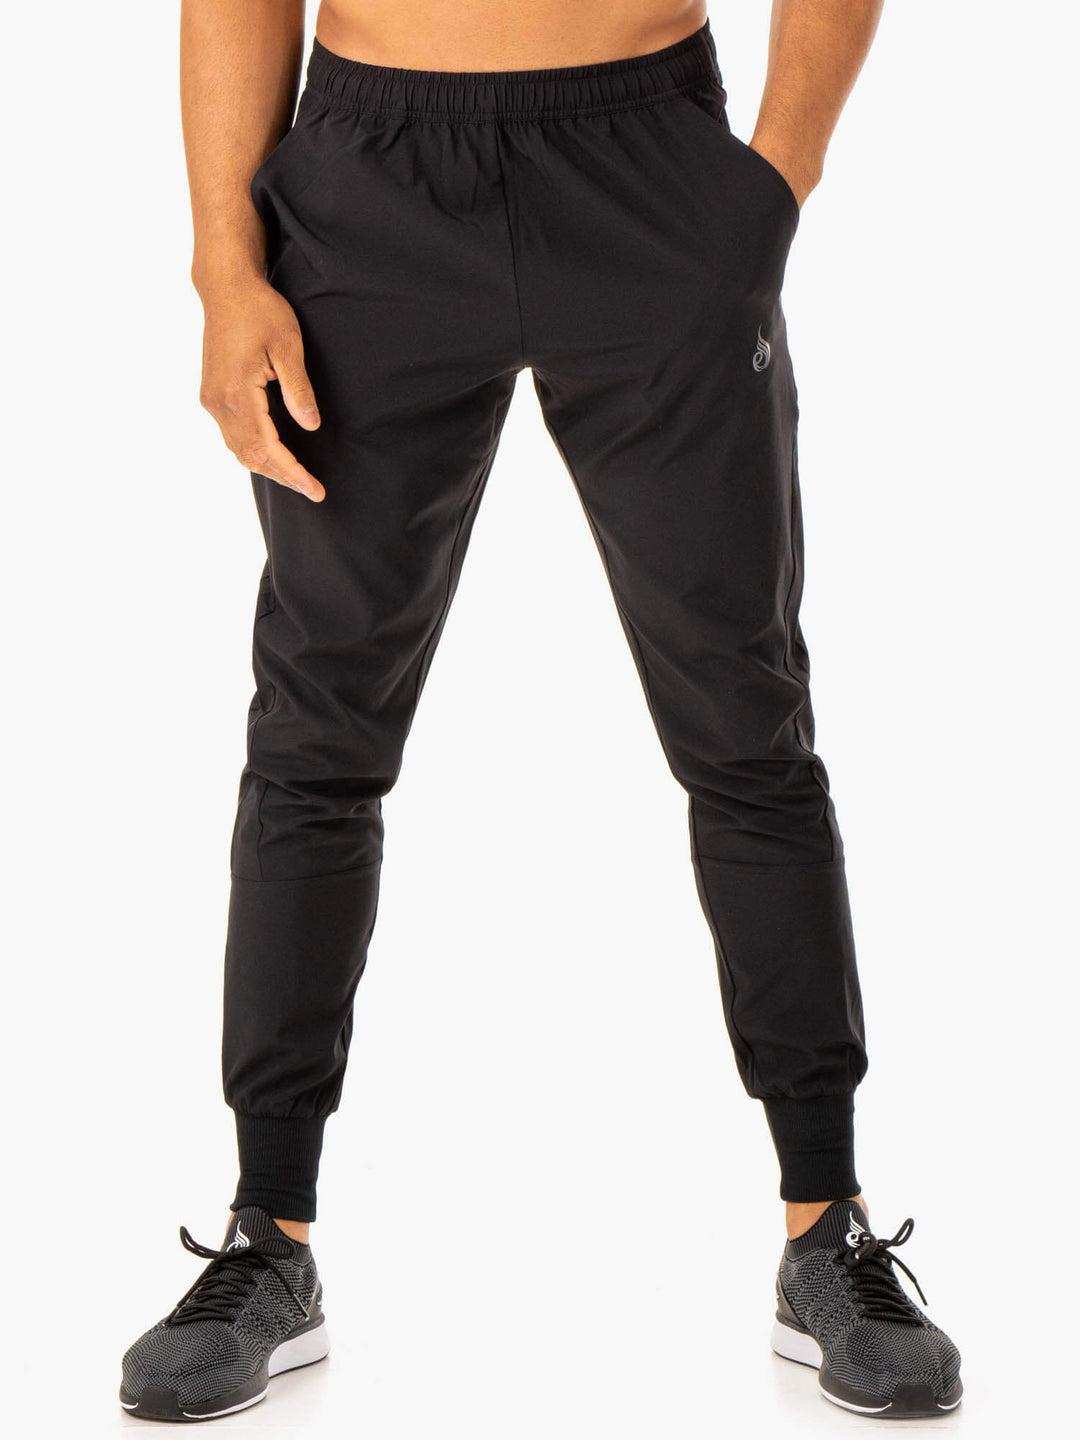 Division Woven Joggers - Black - Ryderwear